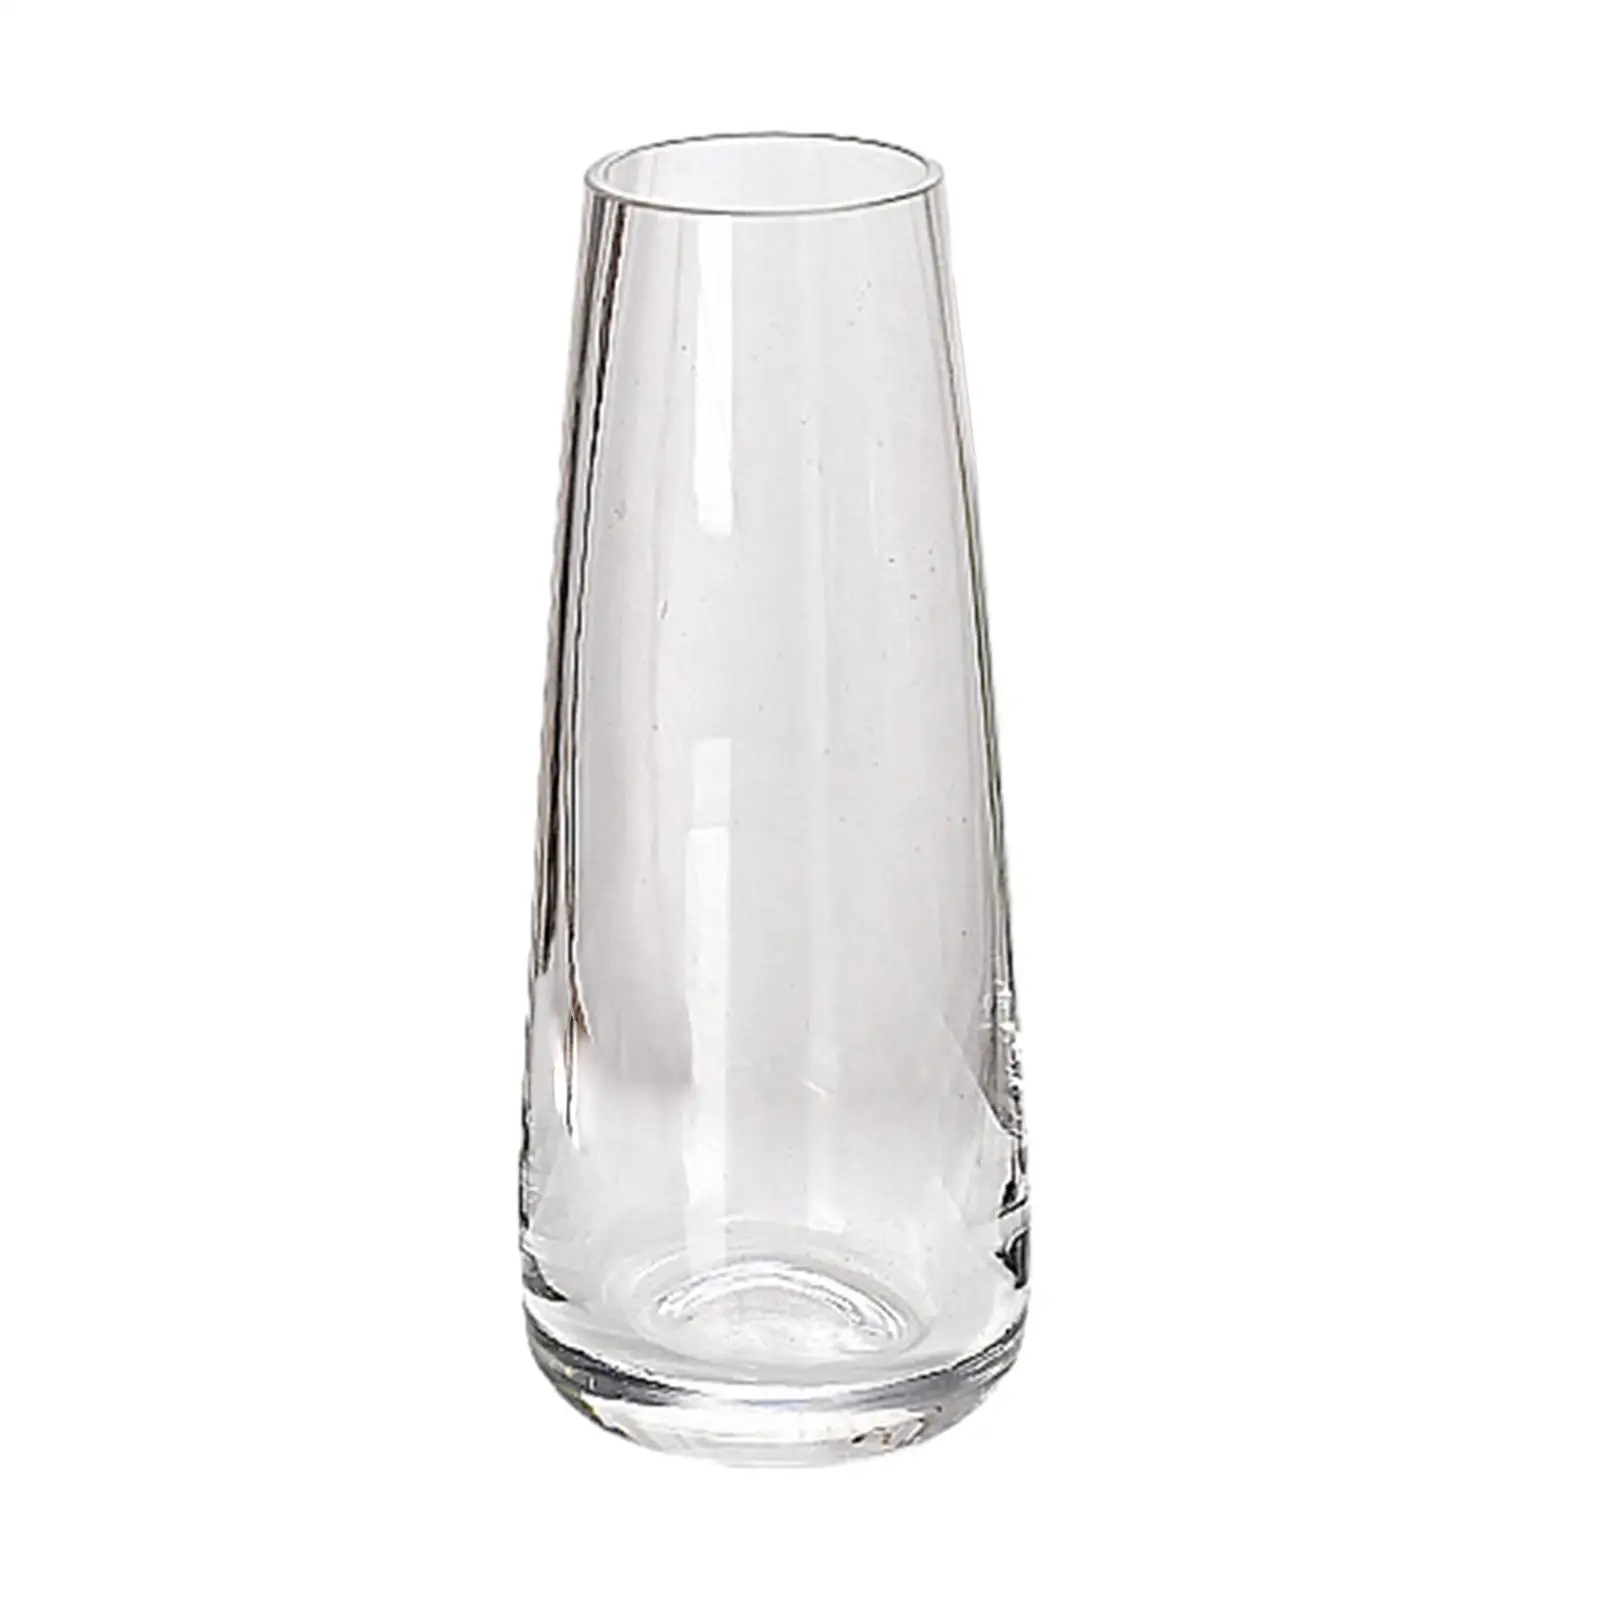 Flower Vase Glass Clear Containers Desk for Dorm Home Drawing Room